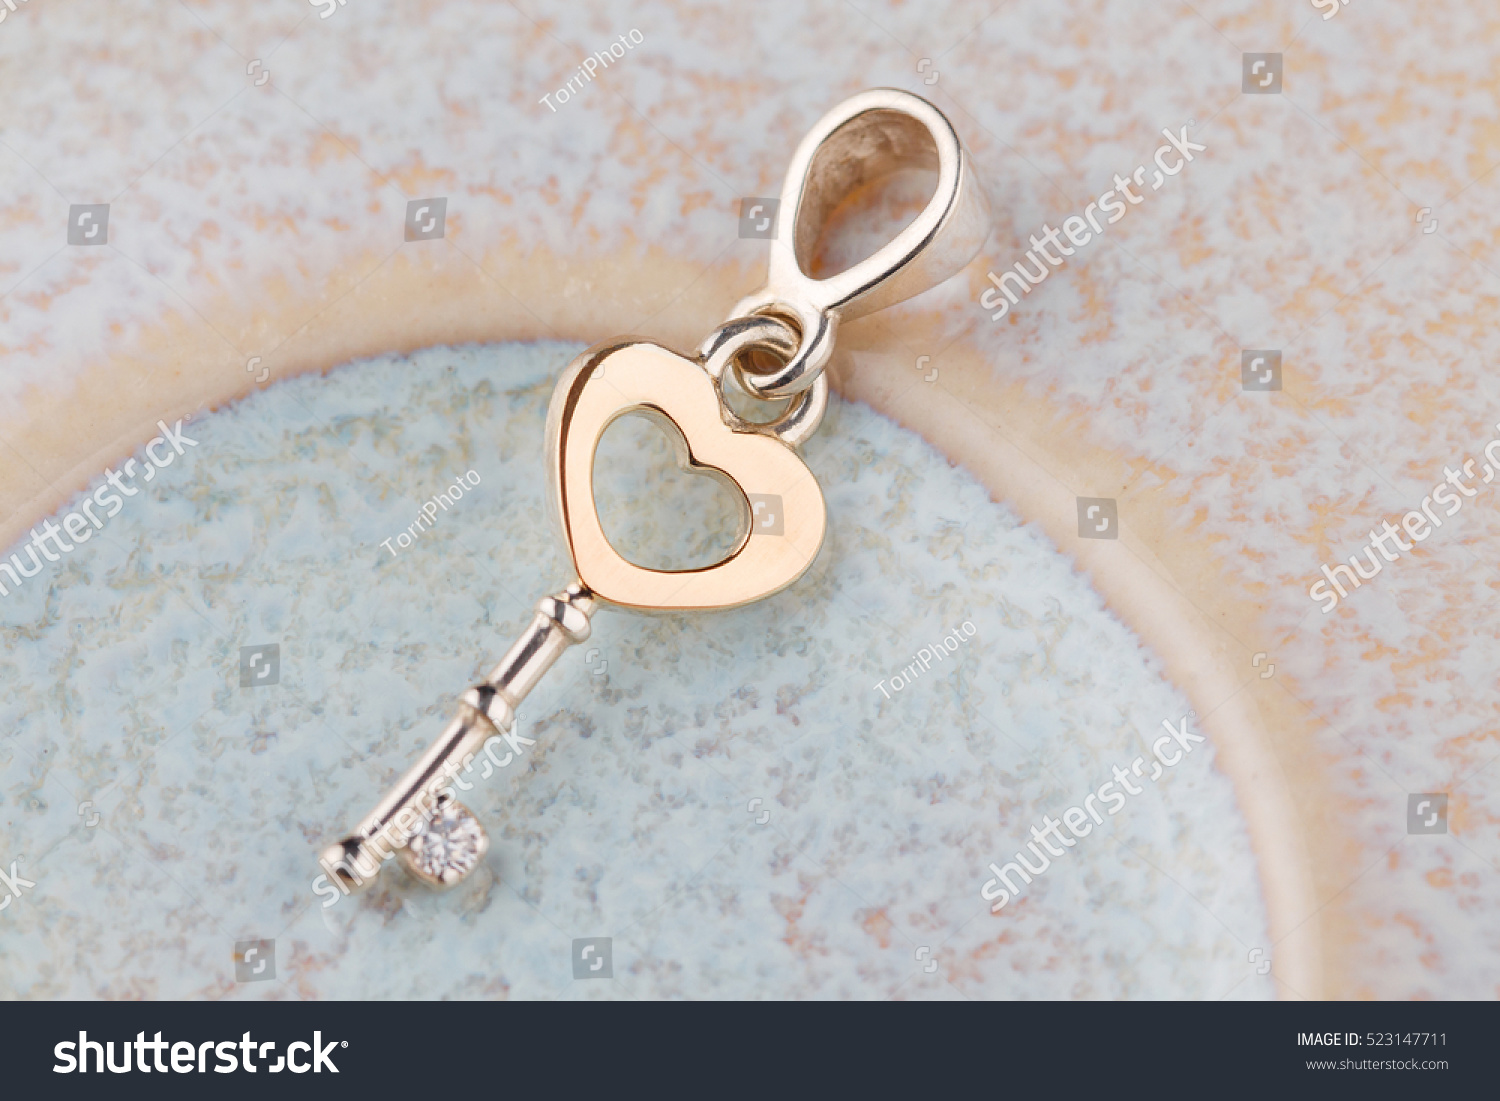 https://www.shutterstock.com/pic-523147711/stock-photo-silver-and-gold-key-pendant-necklace-romantic-jewelry-for-valentines-day.html